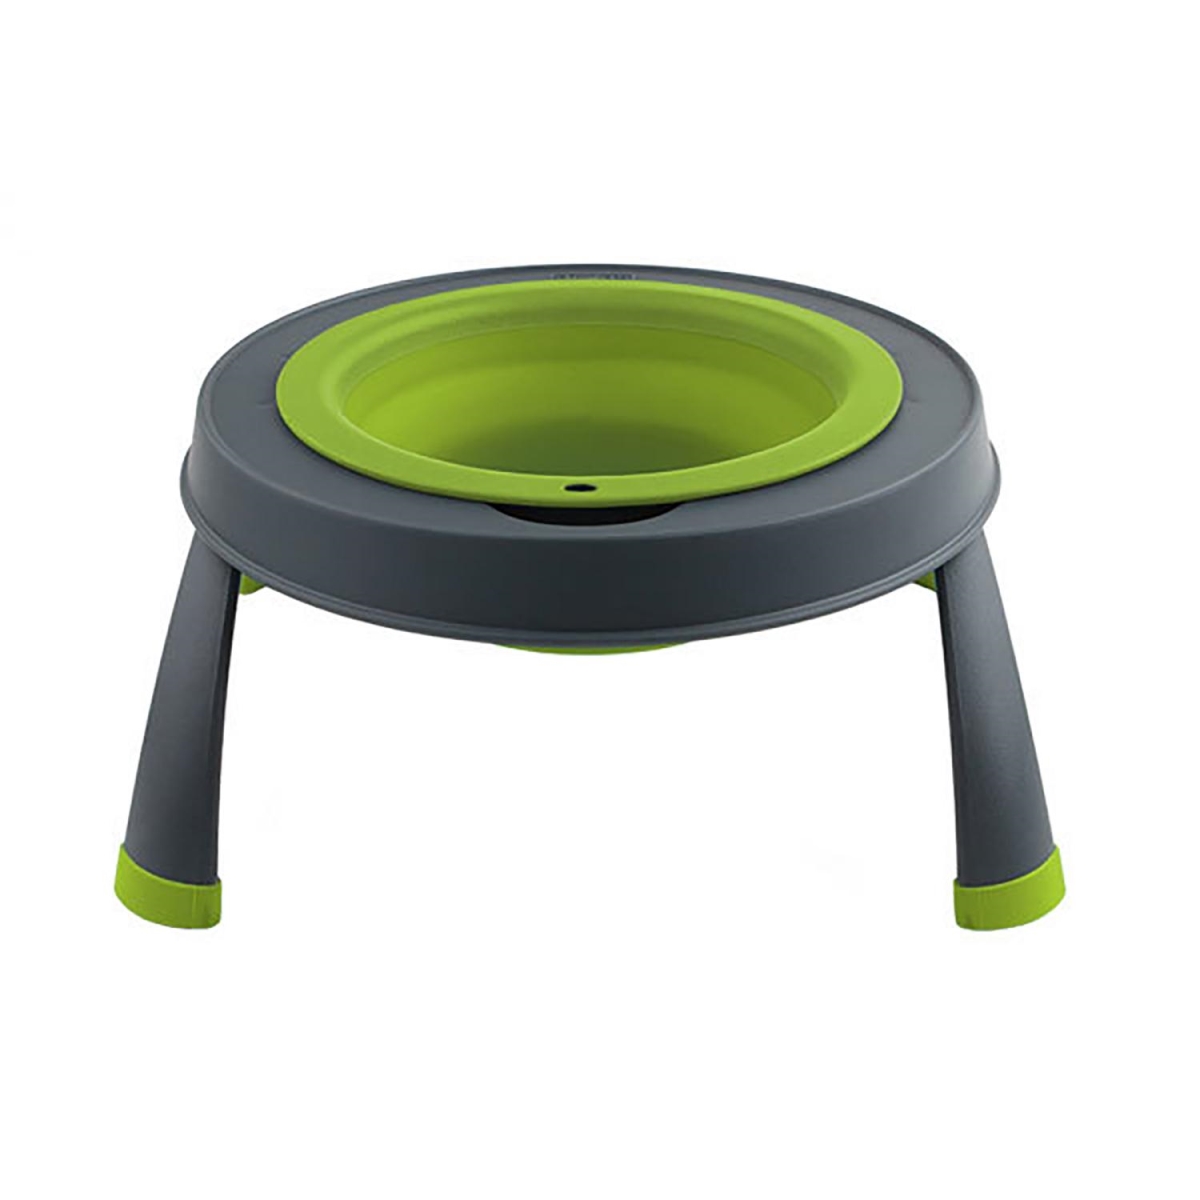 Pw130432383 Single Elevated Dog Bowl, Green - Small